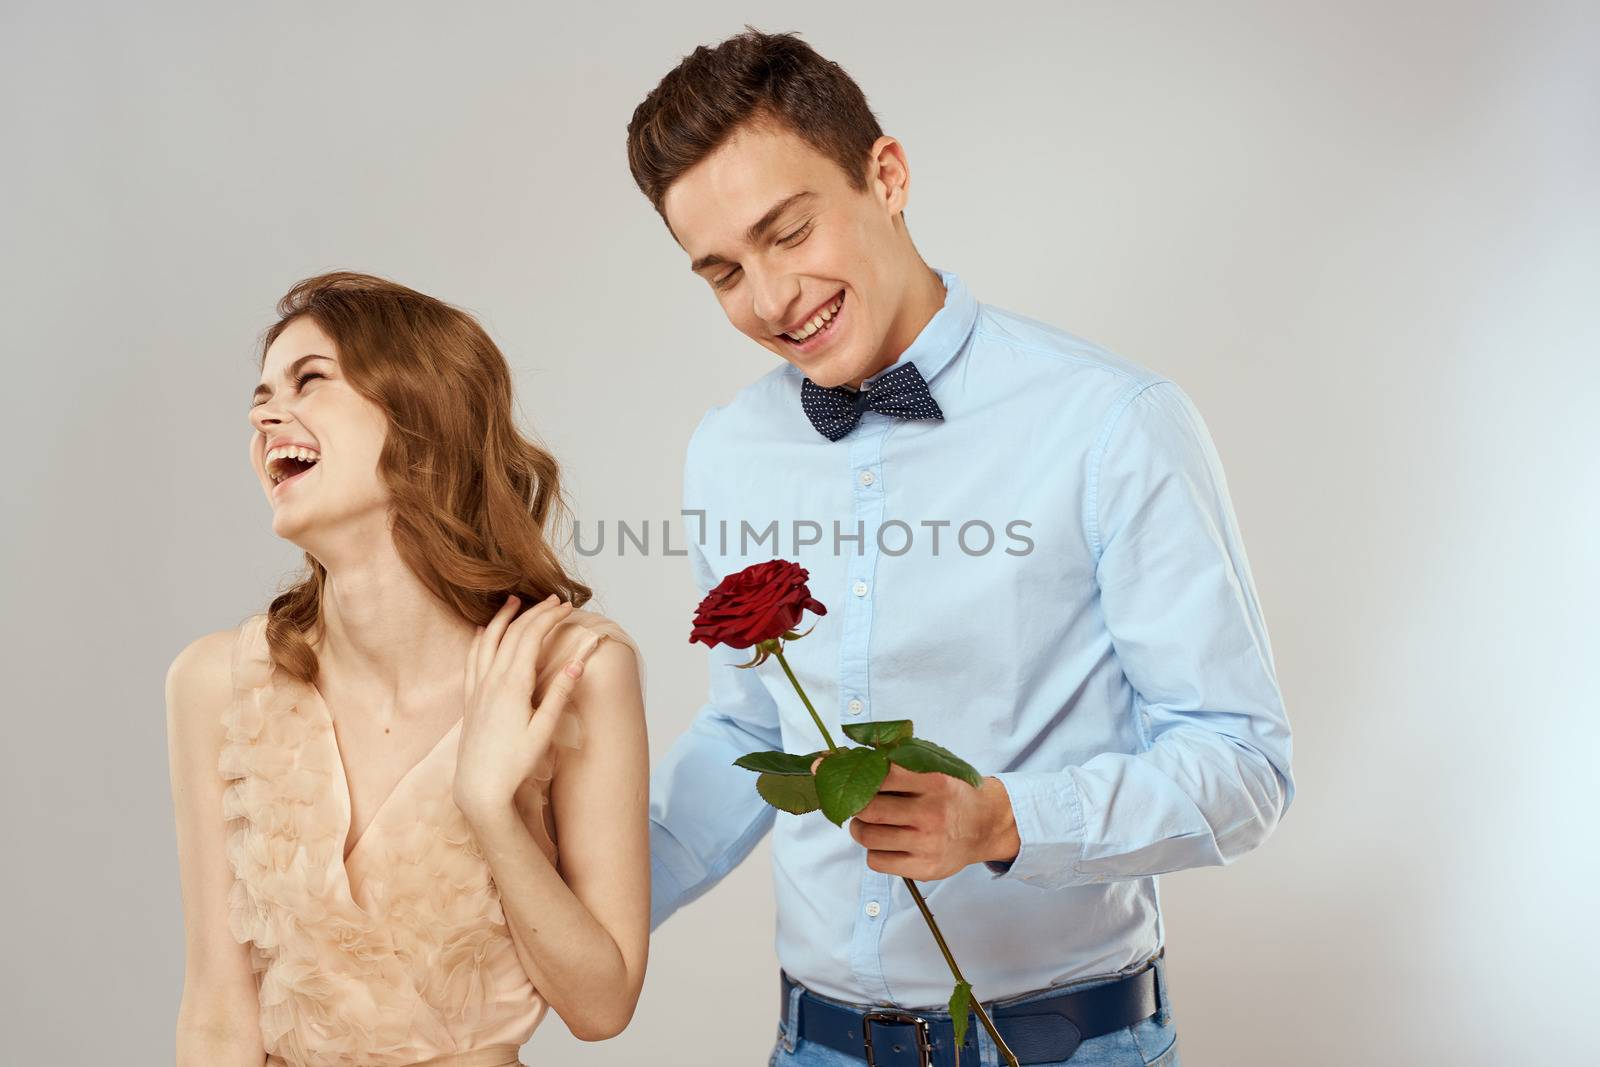 Cheerful young couple romance embrace relationship red rose lifestyle light background by SHOTPRIME